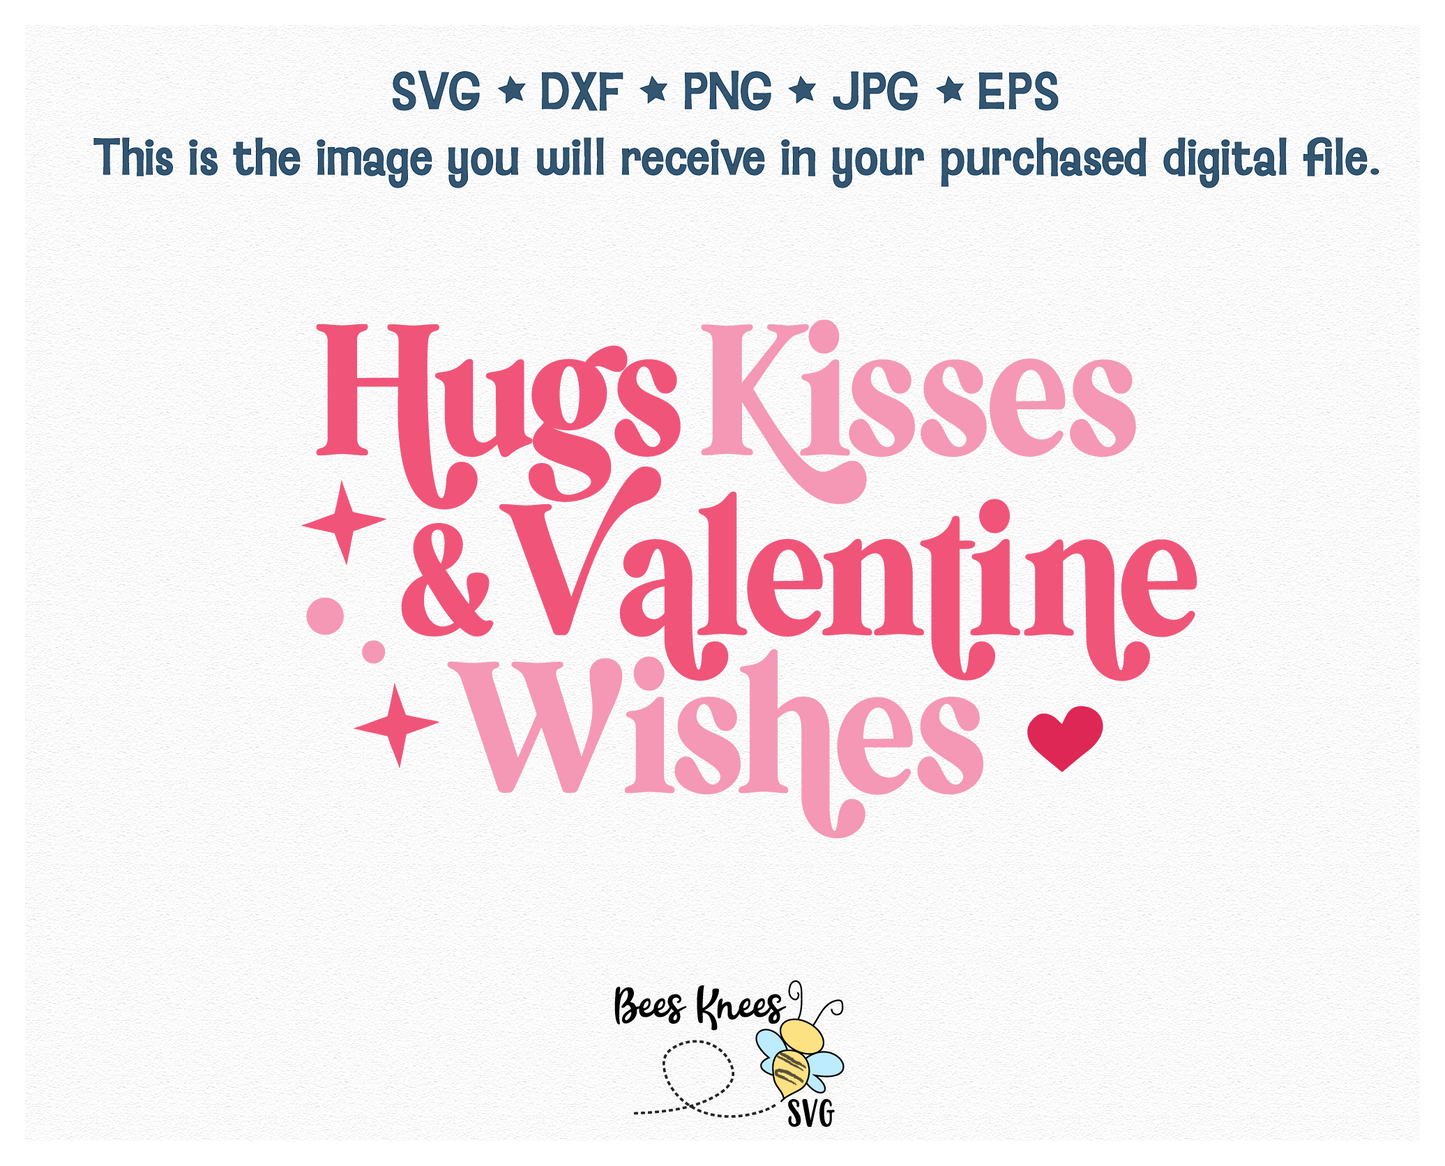 Hugs Kisses and Valentines Wishes Retro Modern SVG Cut File Digital Download